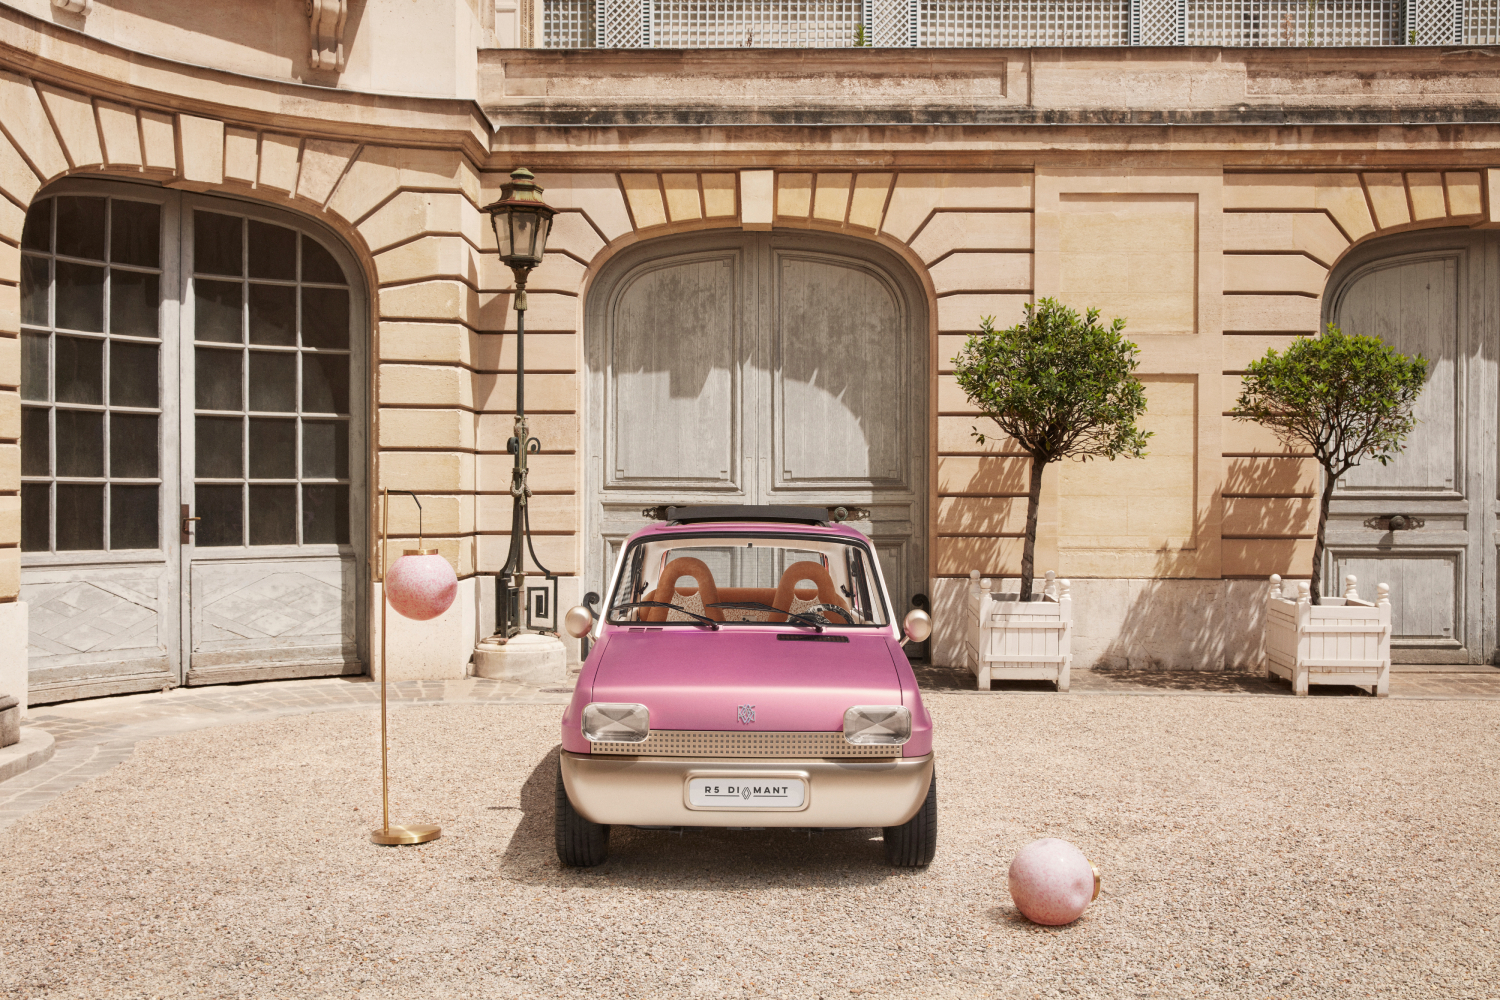 The Renault 5 Diamant Takes Luxurious Hatchbacks to New Heights